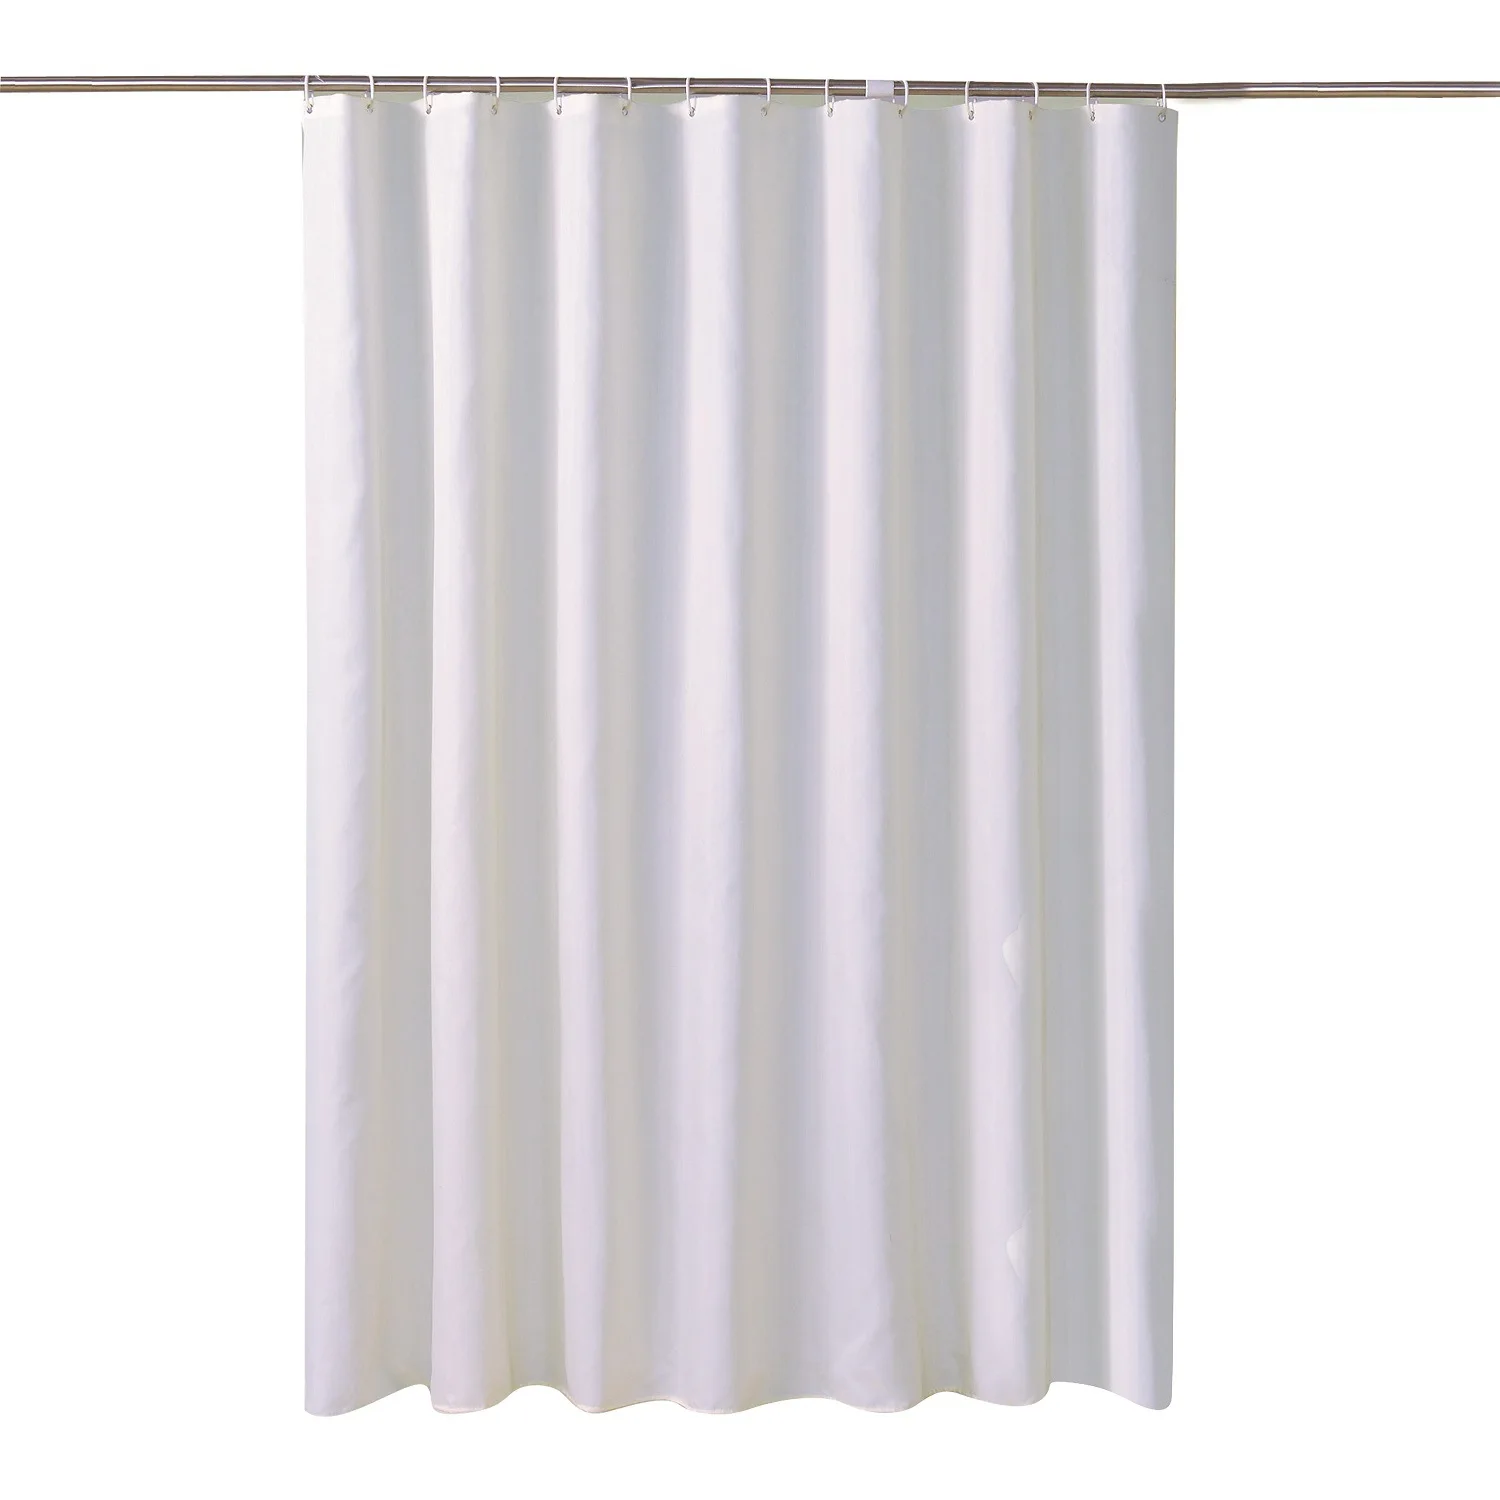 

Hotel Quality of White Polyester Fabric Shower Curtain Liner, Solid colors